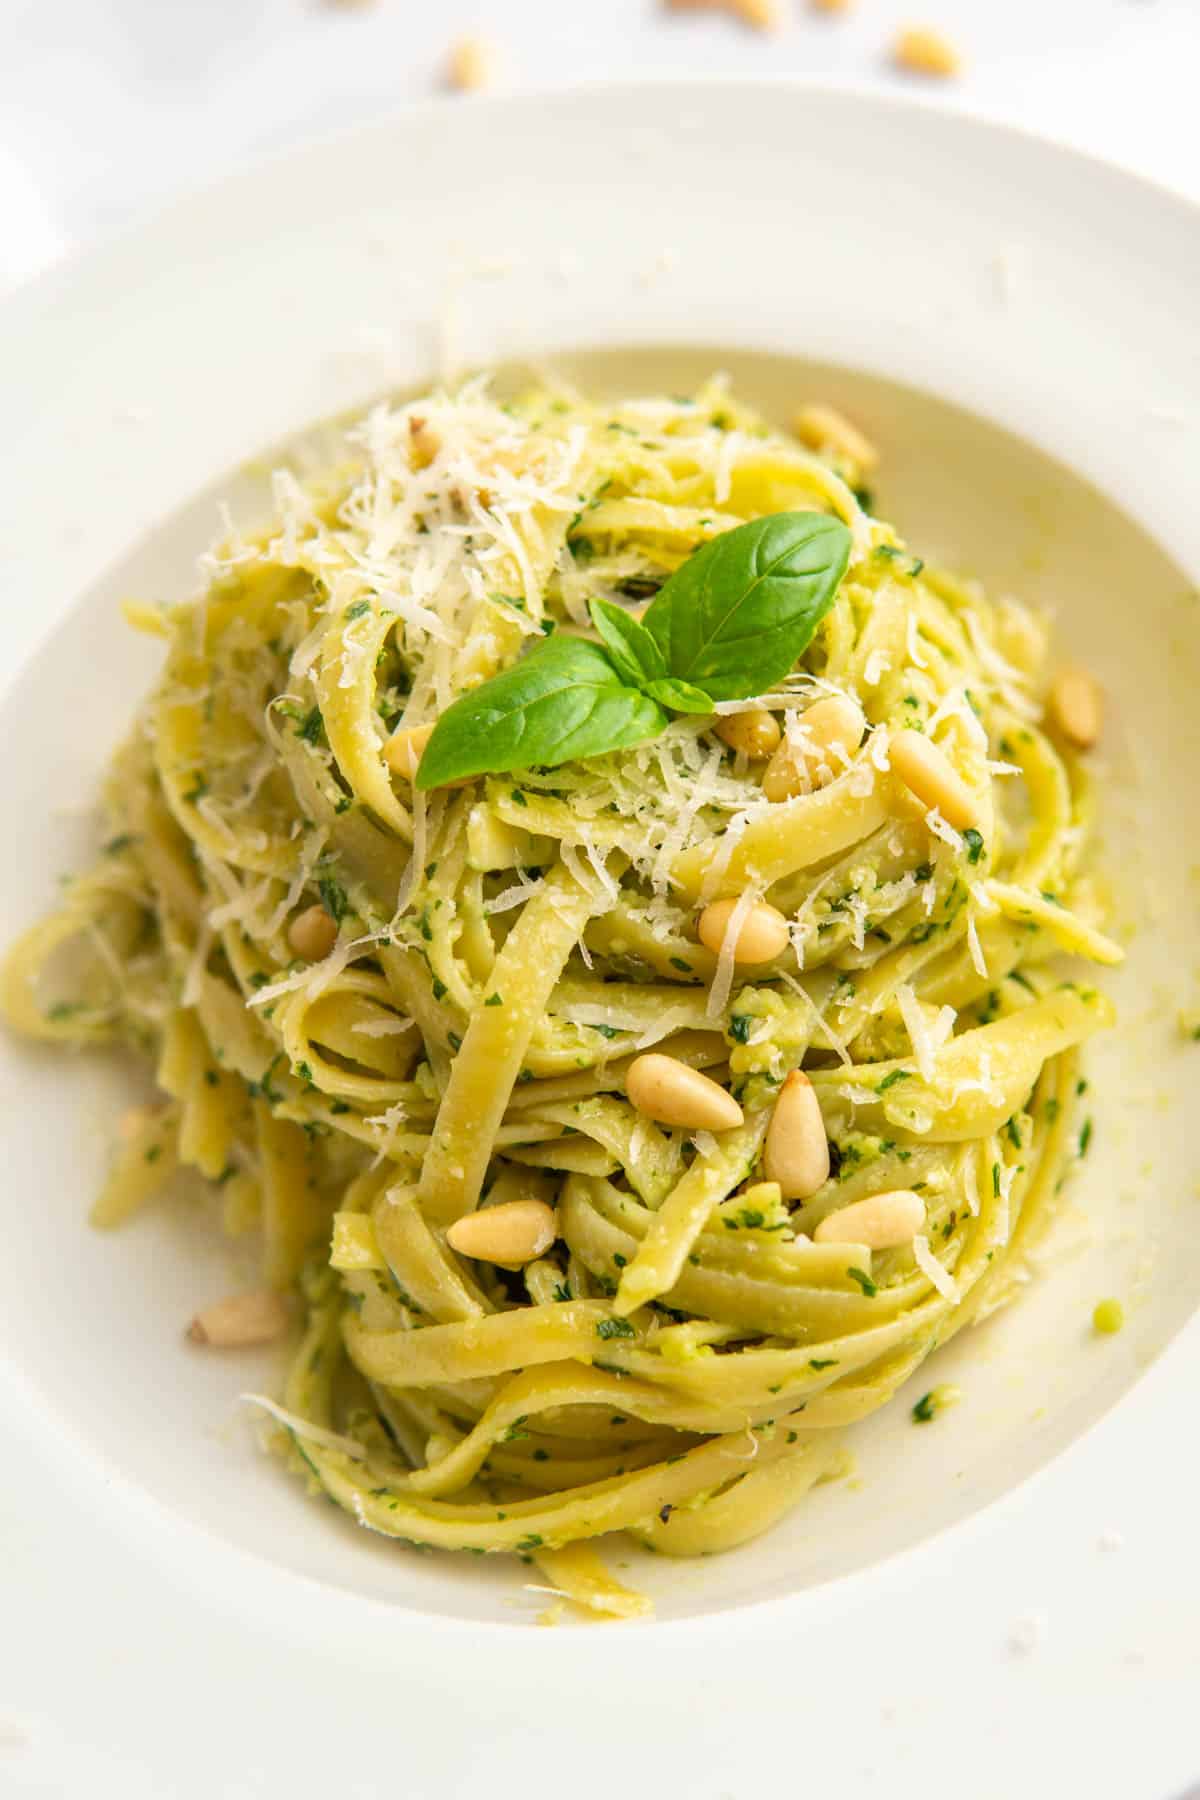 Basil pesto pasta served in a white pasta bowl garnished with pine nuts, parmesan cheese, and fresh basil leaves.